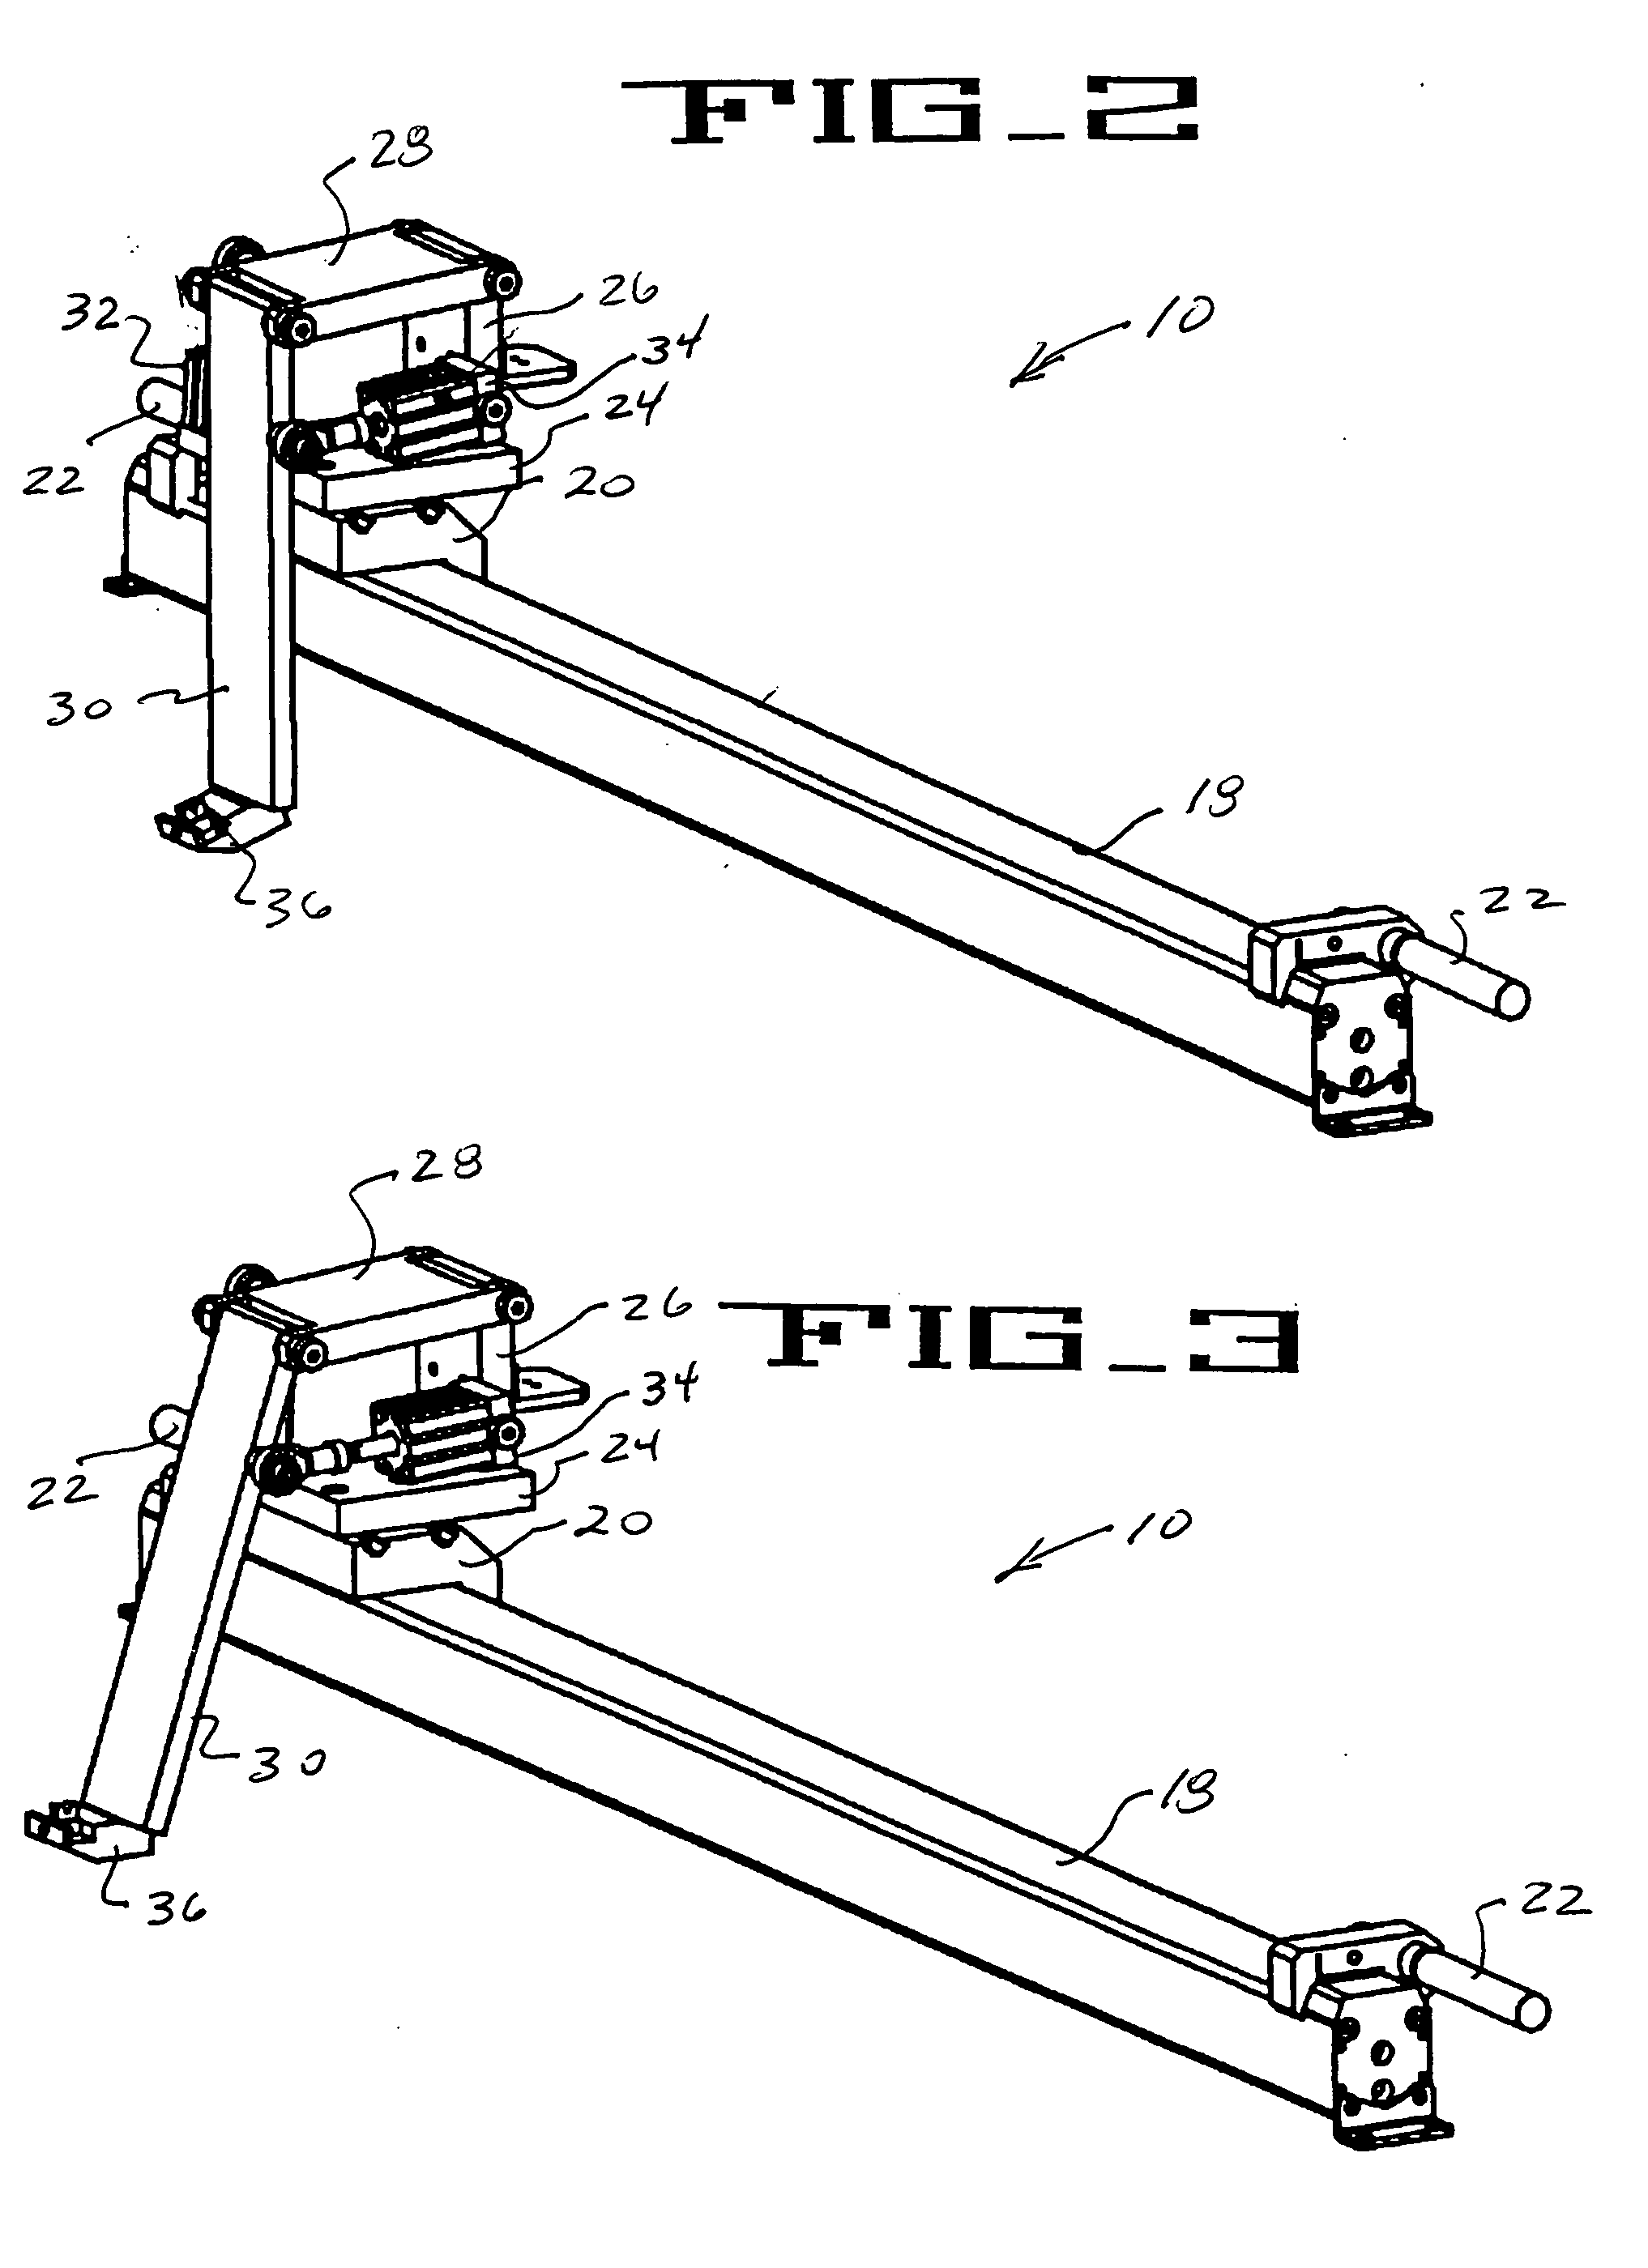 Apparatus for cleaning seal bar in bag-making machine